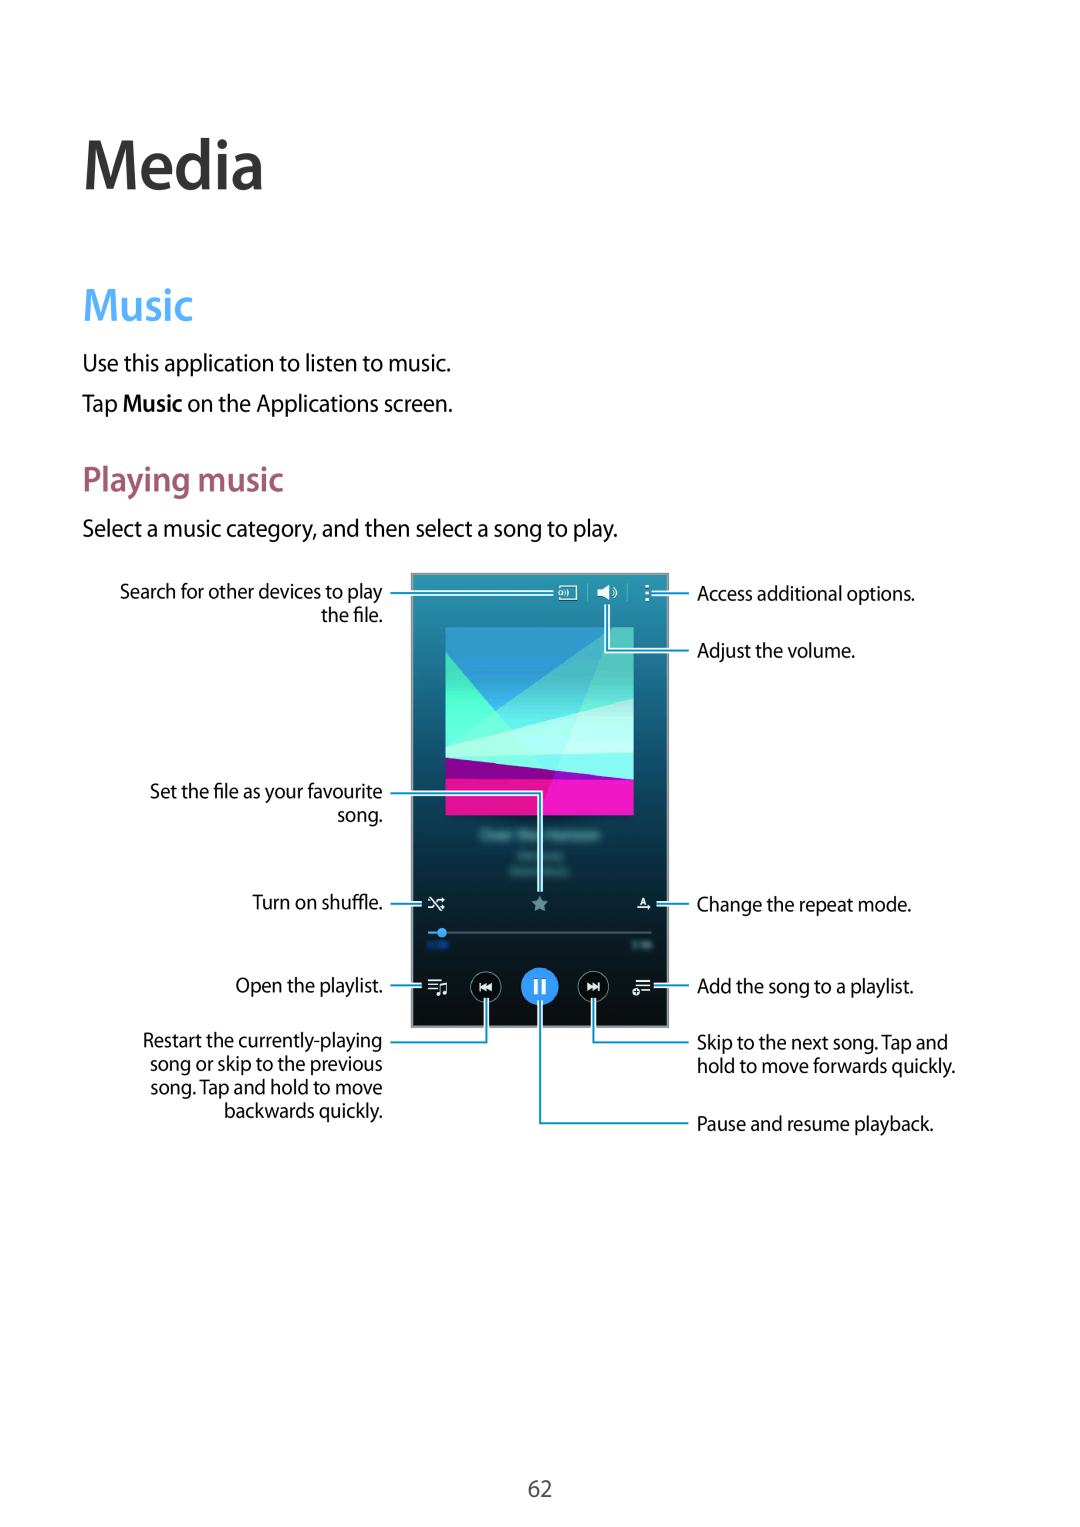 Samsung GT-I9195ZWIETL Media, Music, Playing music, the le, Adjust the volume, song, Turn on shu e, Change the repeat mode 